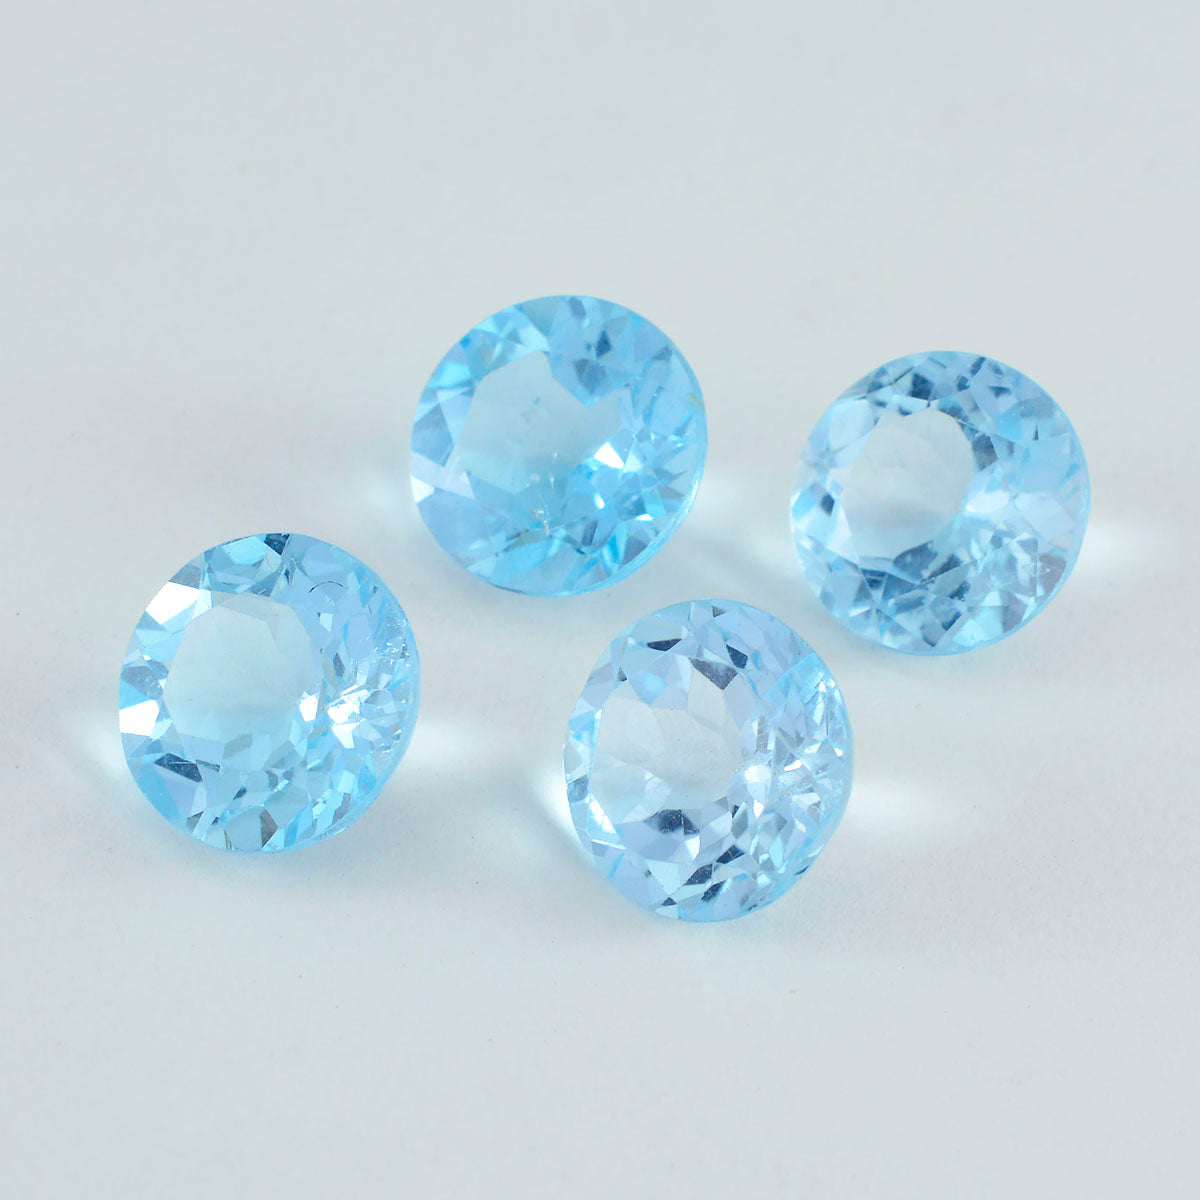 Riyogems 1PC Genuine Blue Topaz Faceted 12x12 mm Round Shape AAA Quality Loose Gems